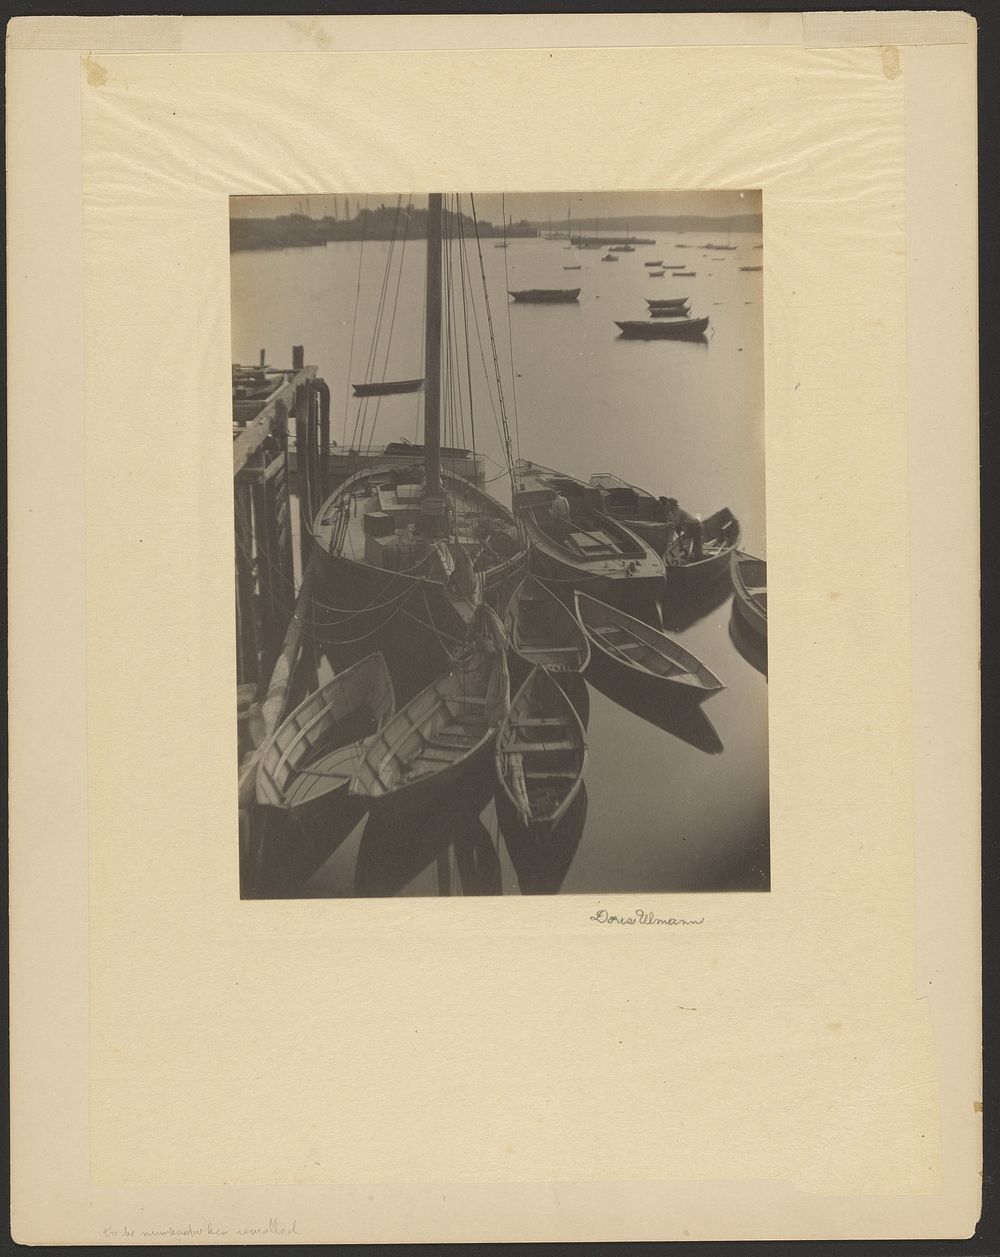 Harbor, Sailboats with Skiffs in Foreground by Doris Ulmann